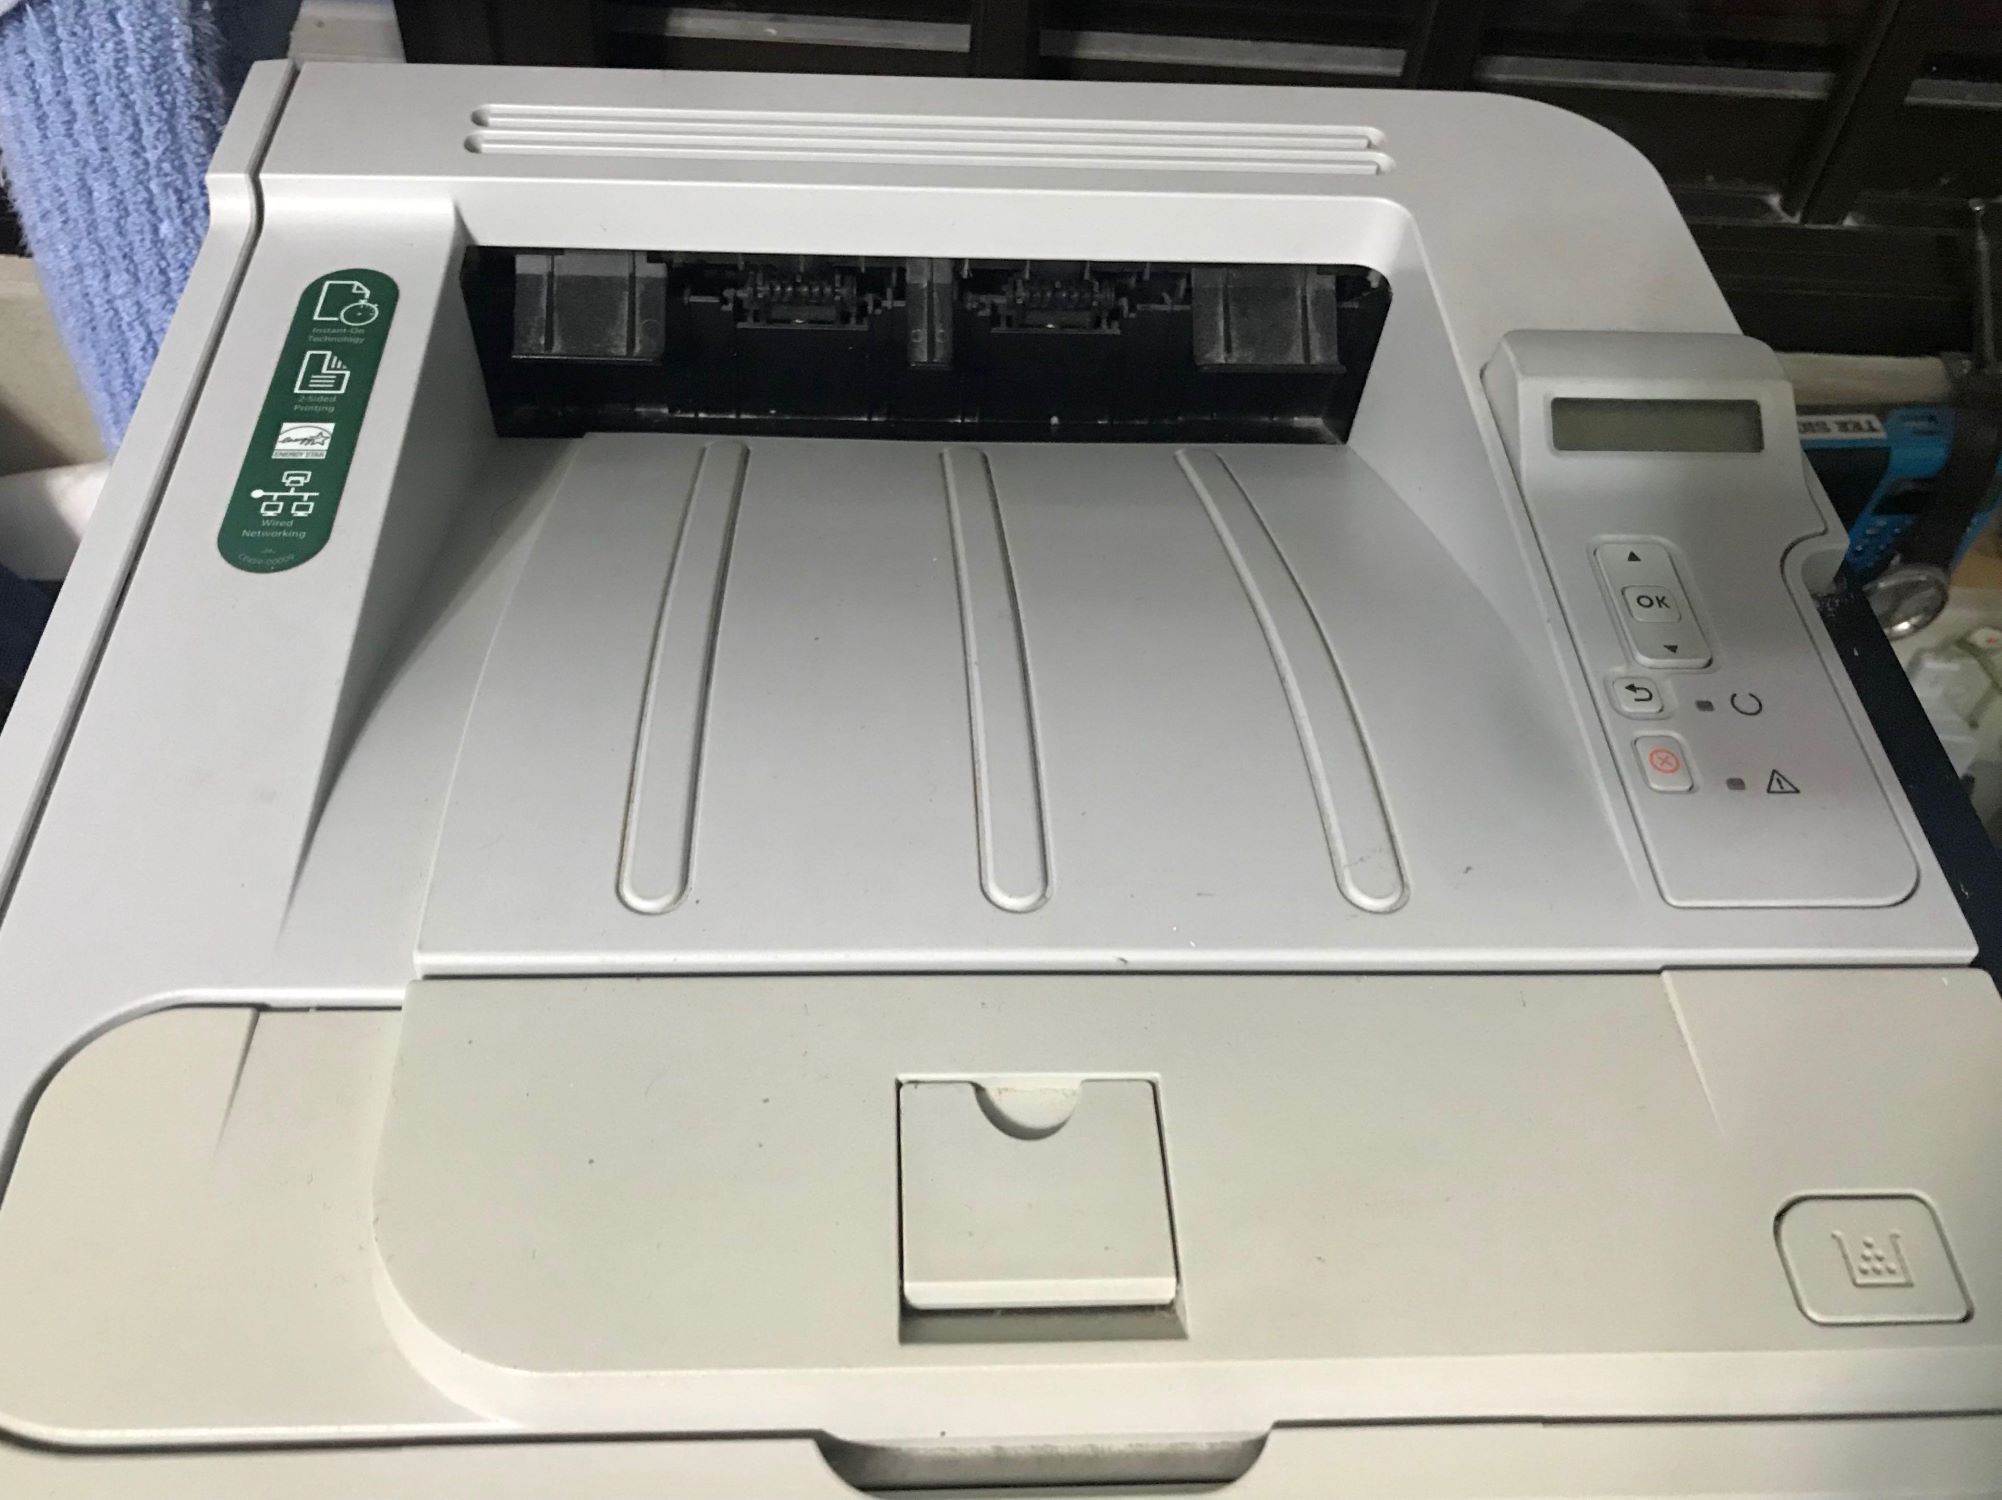 How To Reset A HP Printer To Factory Settings